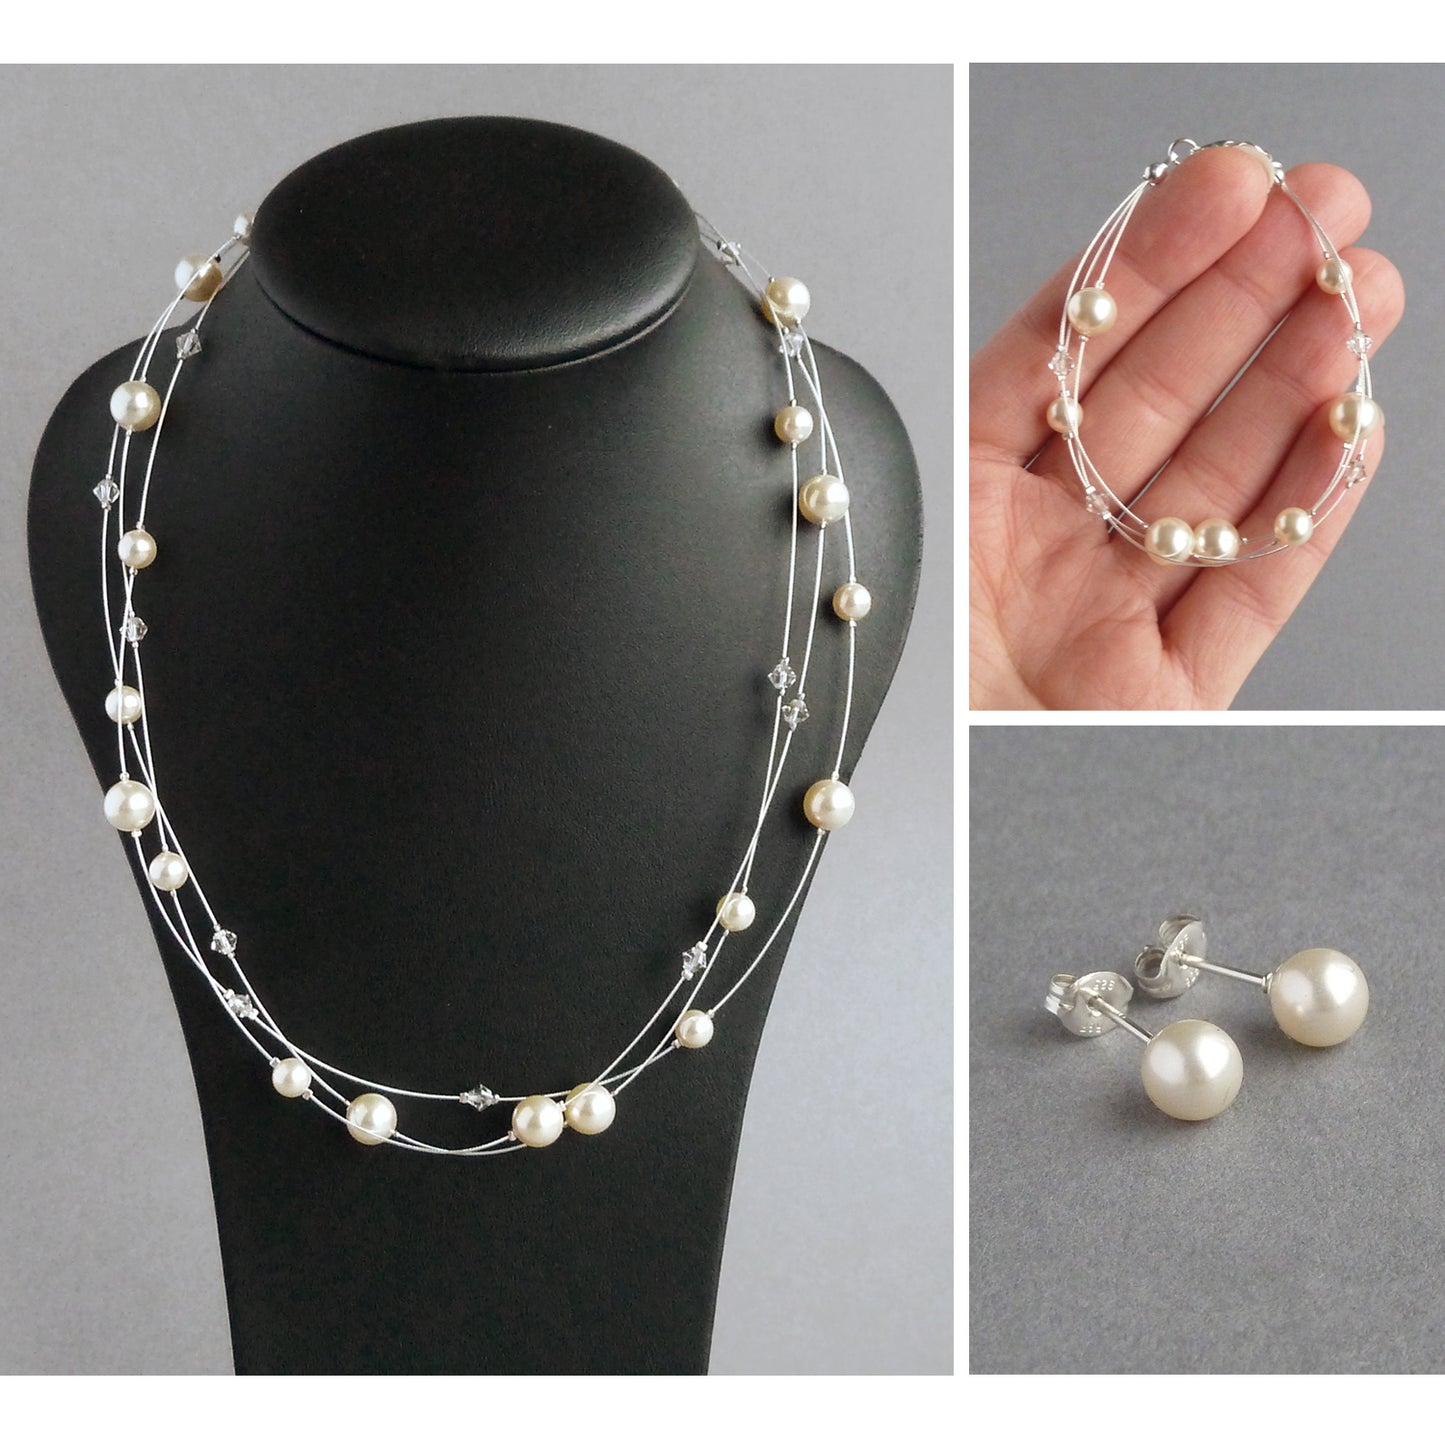 Cream floating pearl jewellery set by Anna King